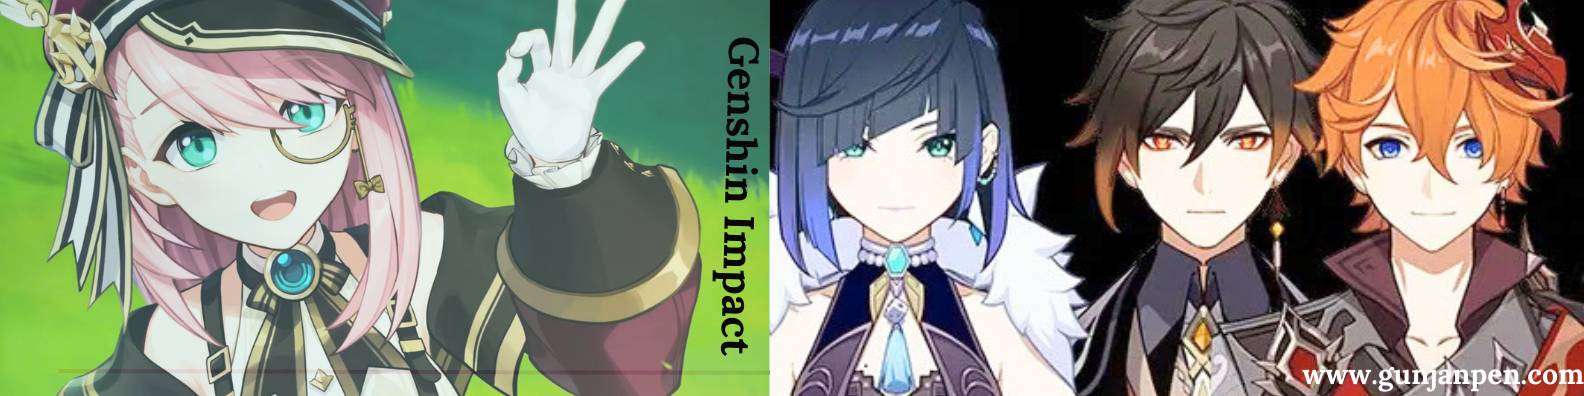 Exclusive GGenshin Impact 4.2 Banner Leaks Spark Discontent Among Fans Amidst Furina's Anticipated Debutenshin Impact Leak Reveals Exciting Version 4.3 New Characters!